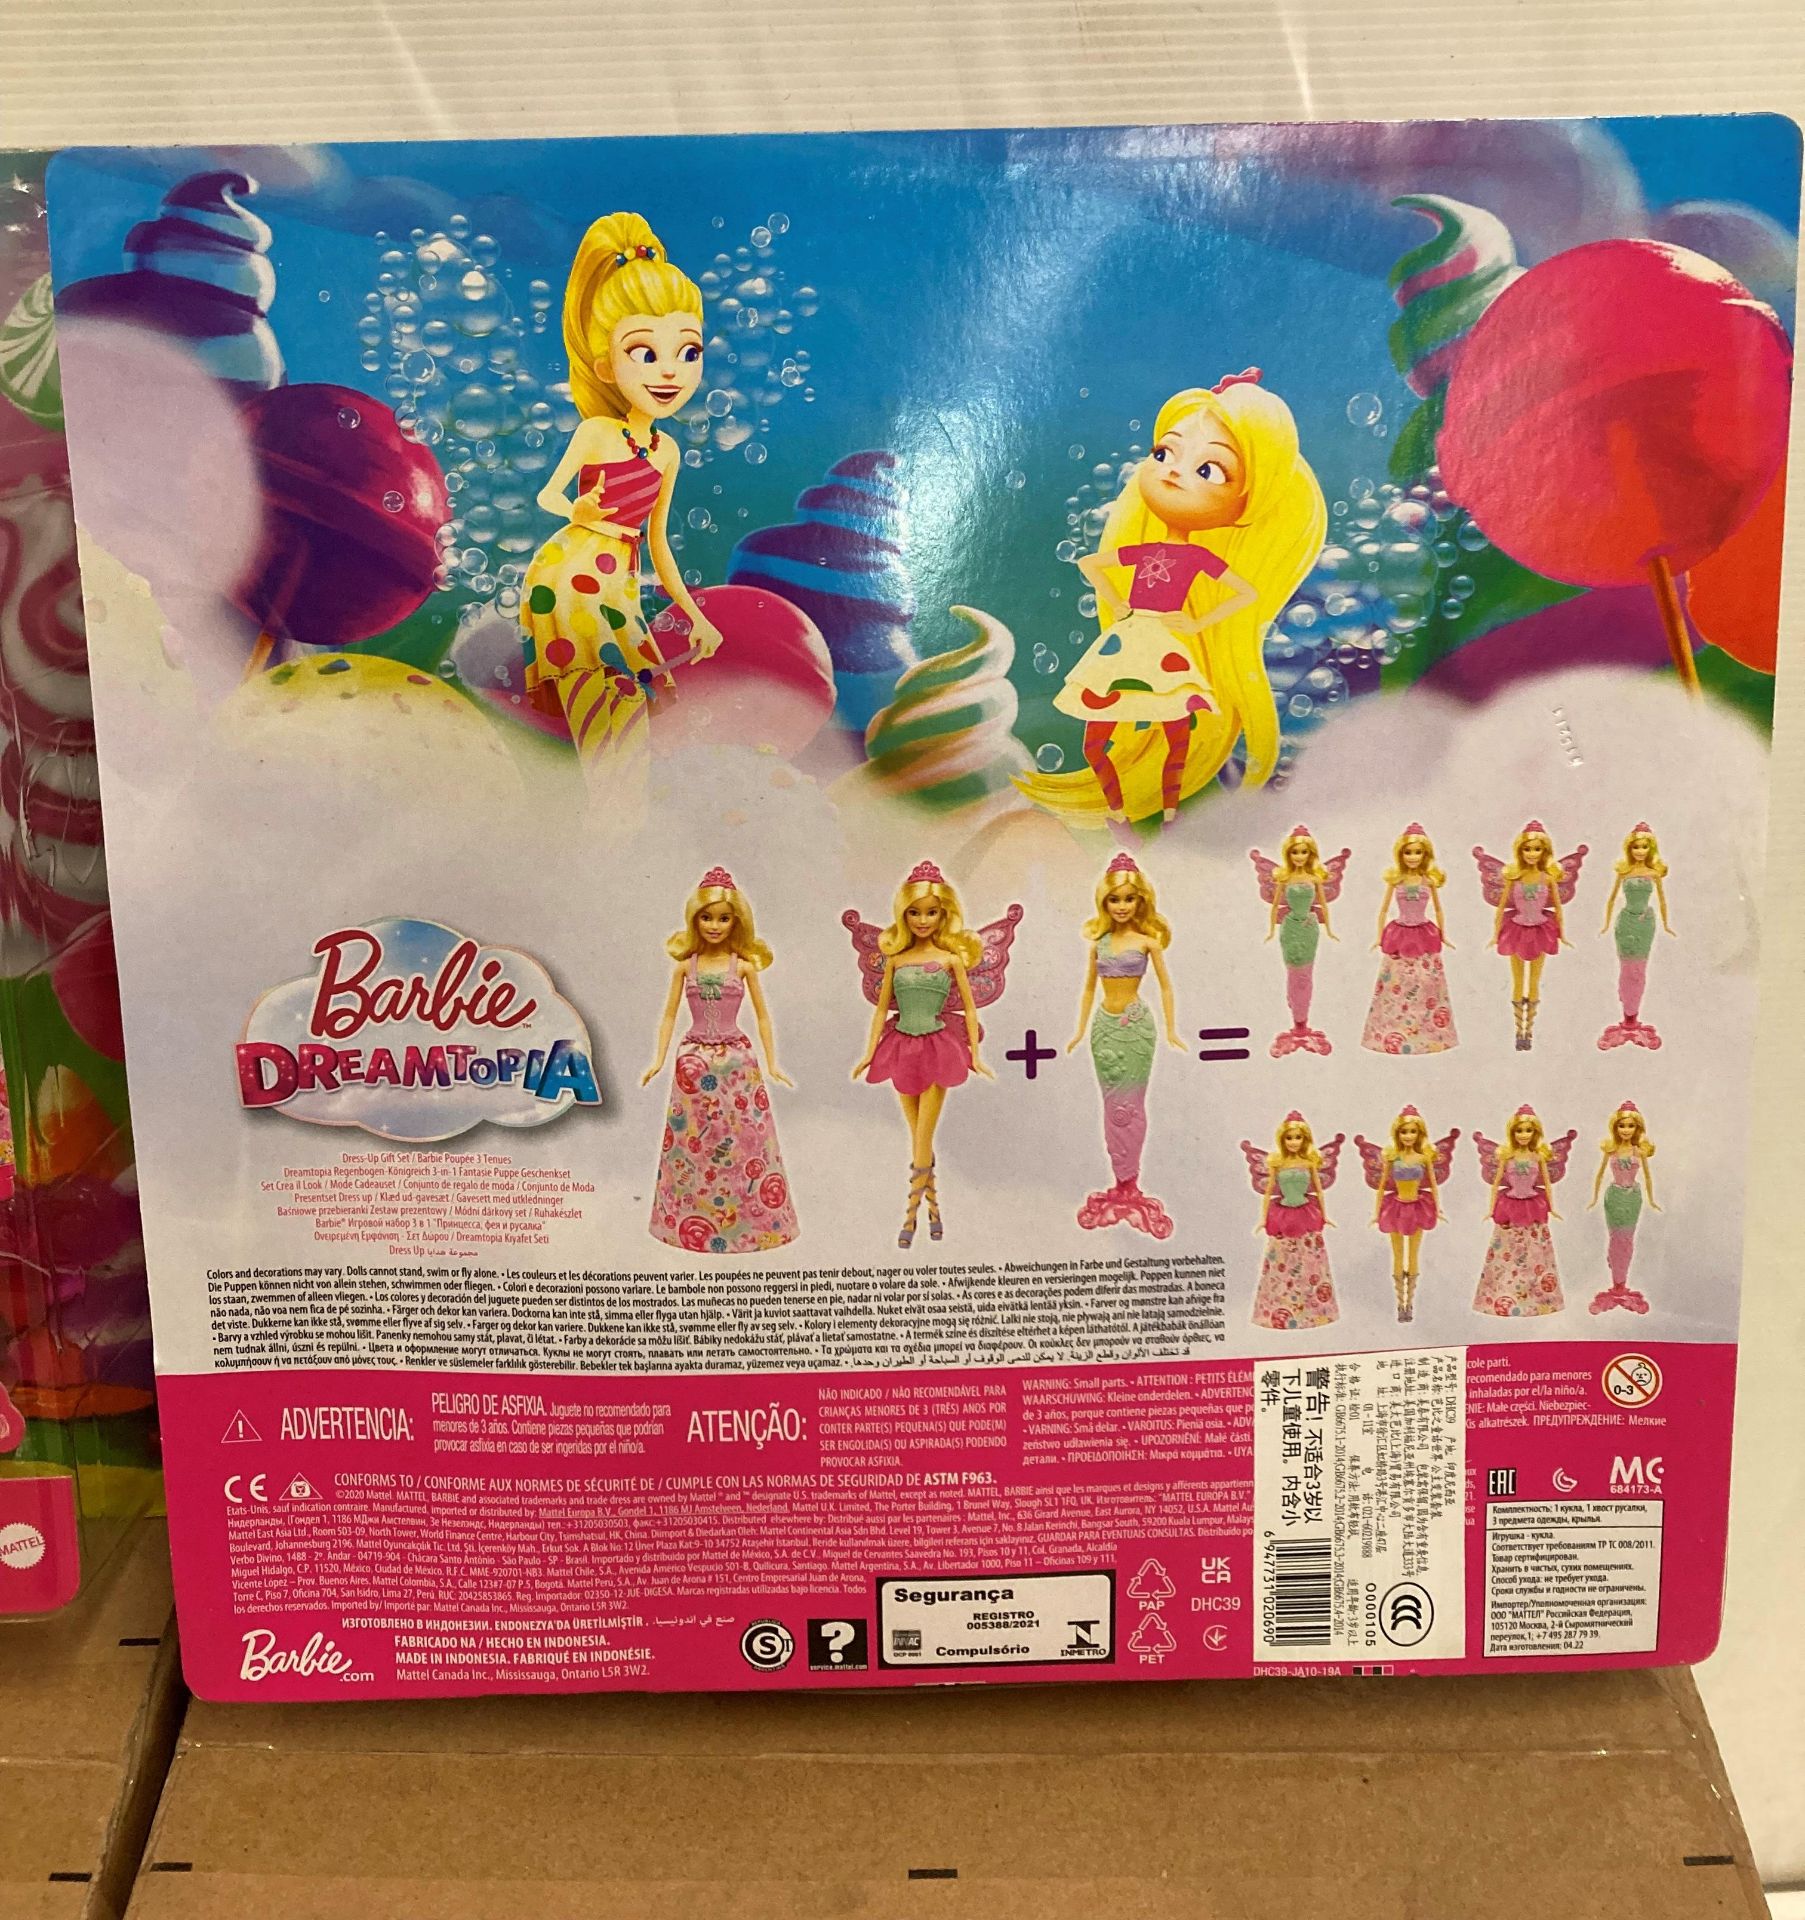 8 x Barbie Dreamtopia doll and accessories (2 x outer boxes) (saleroom location: M08) - Image 3 of 3